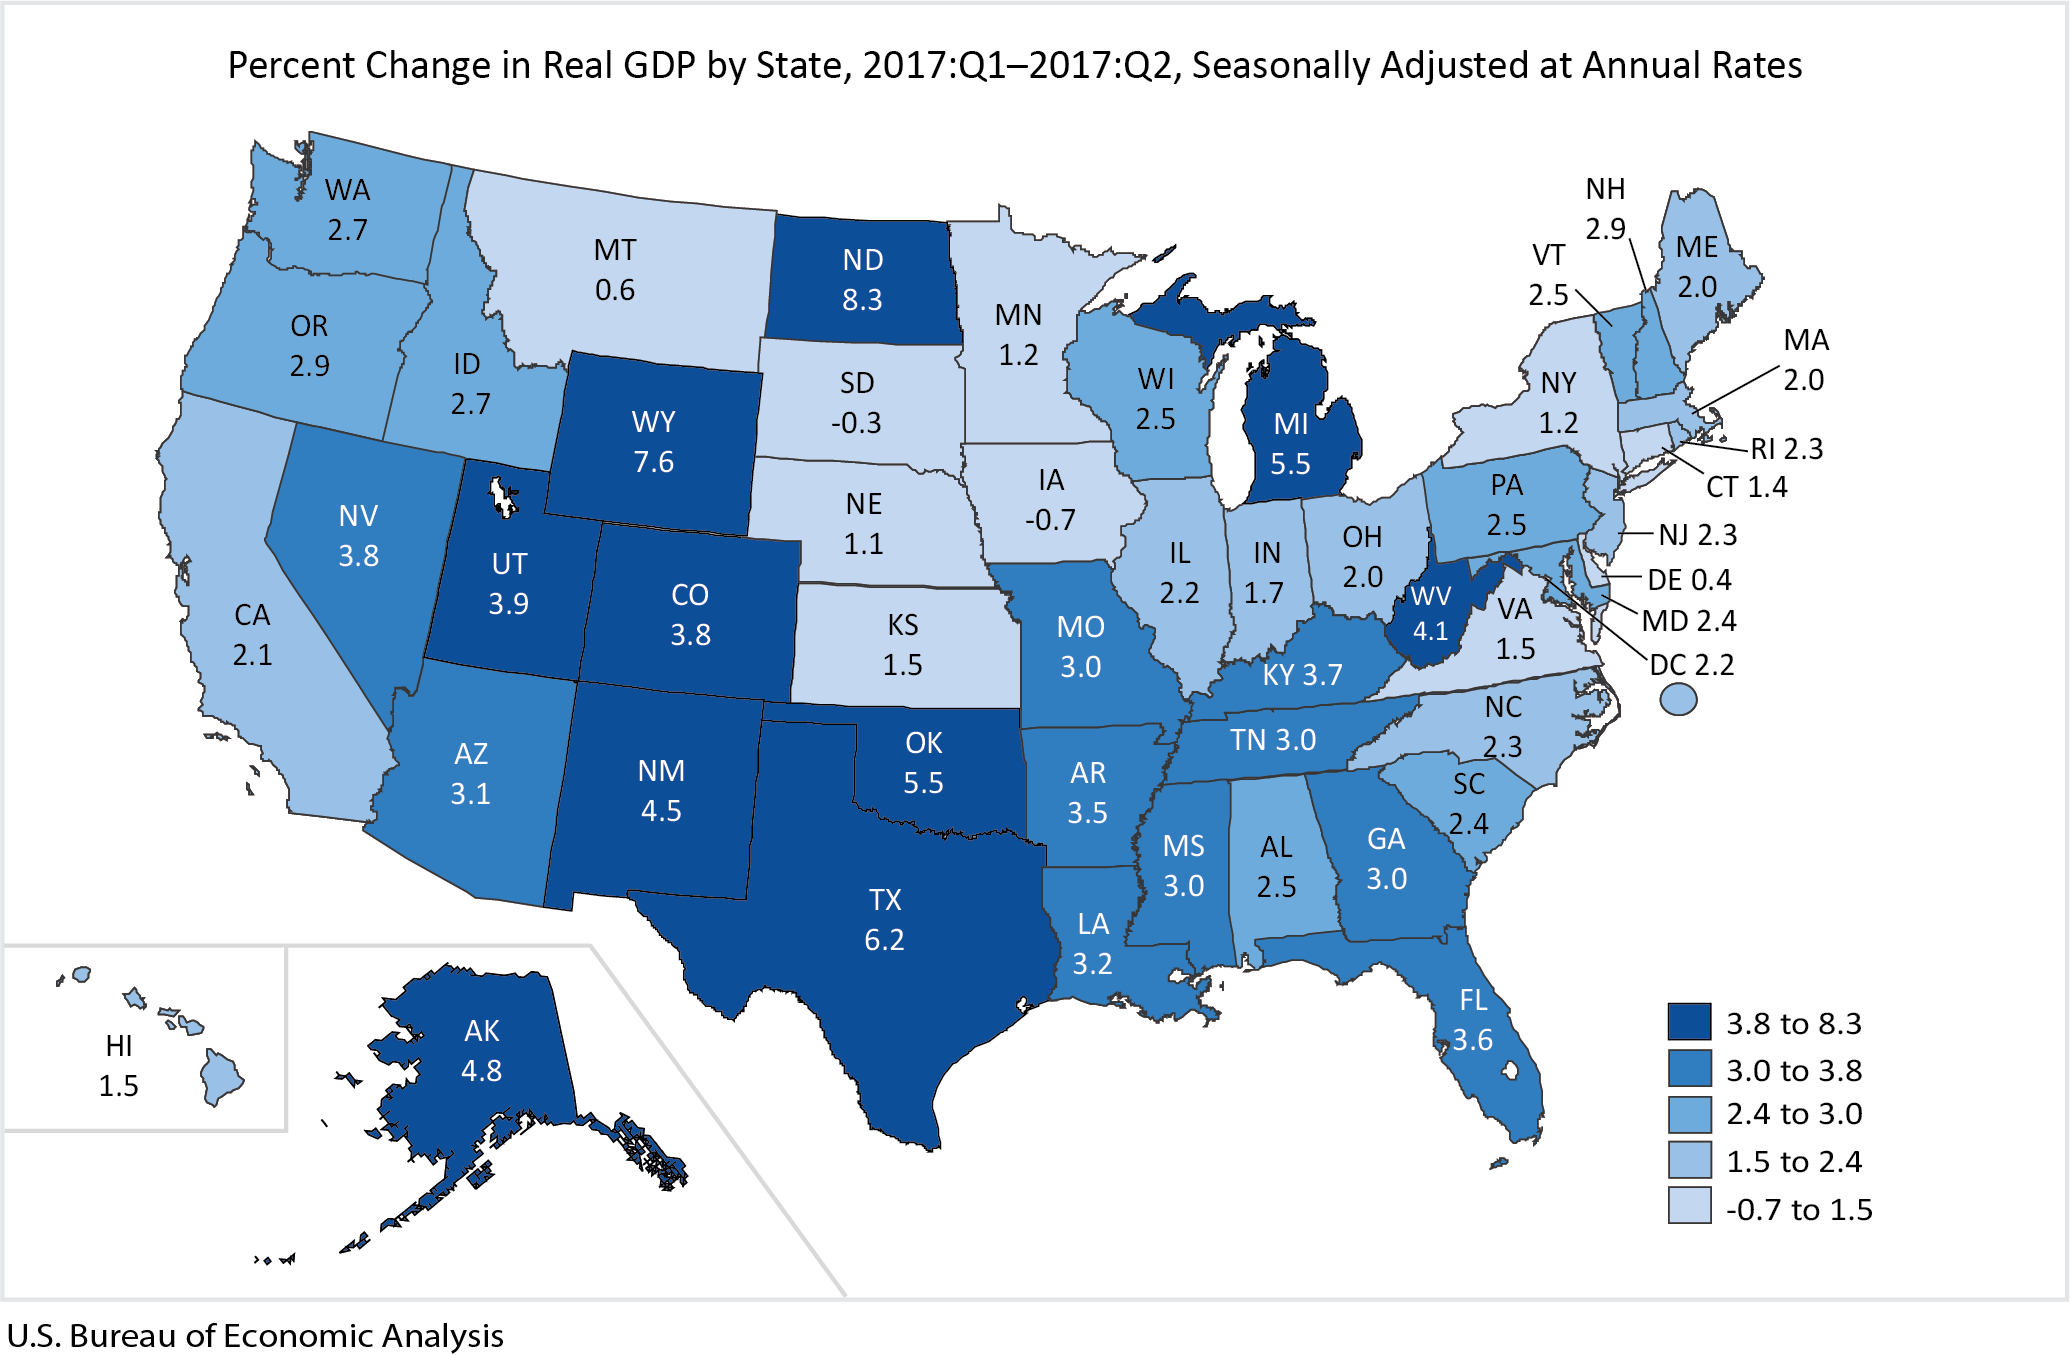 Map of U.S. visualizing percent change in Real GDP by state